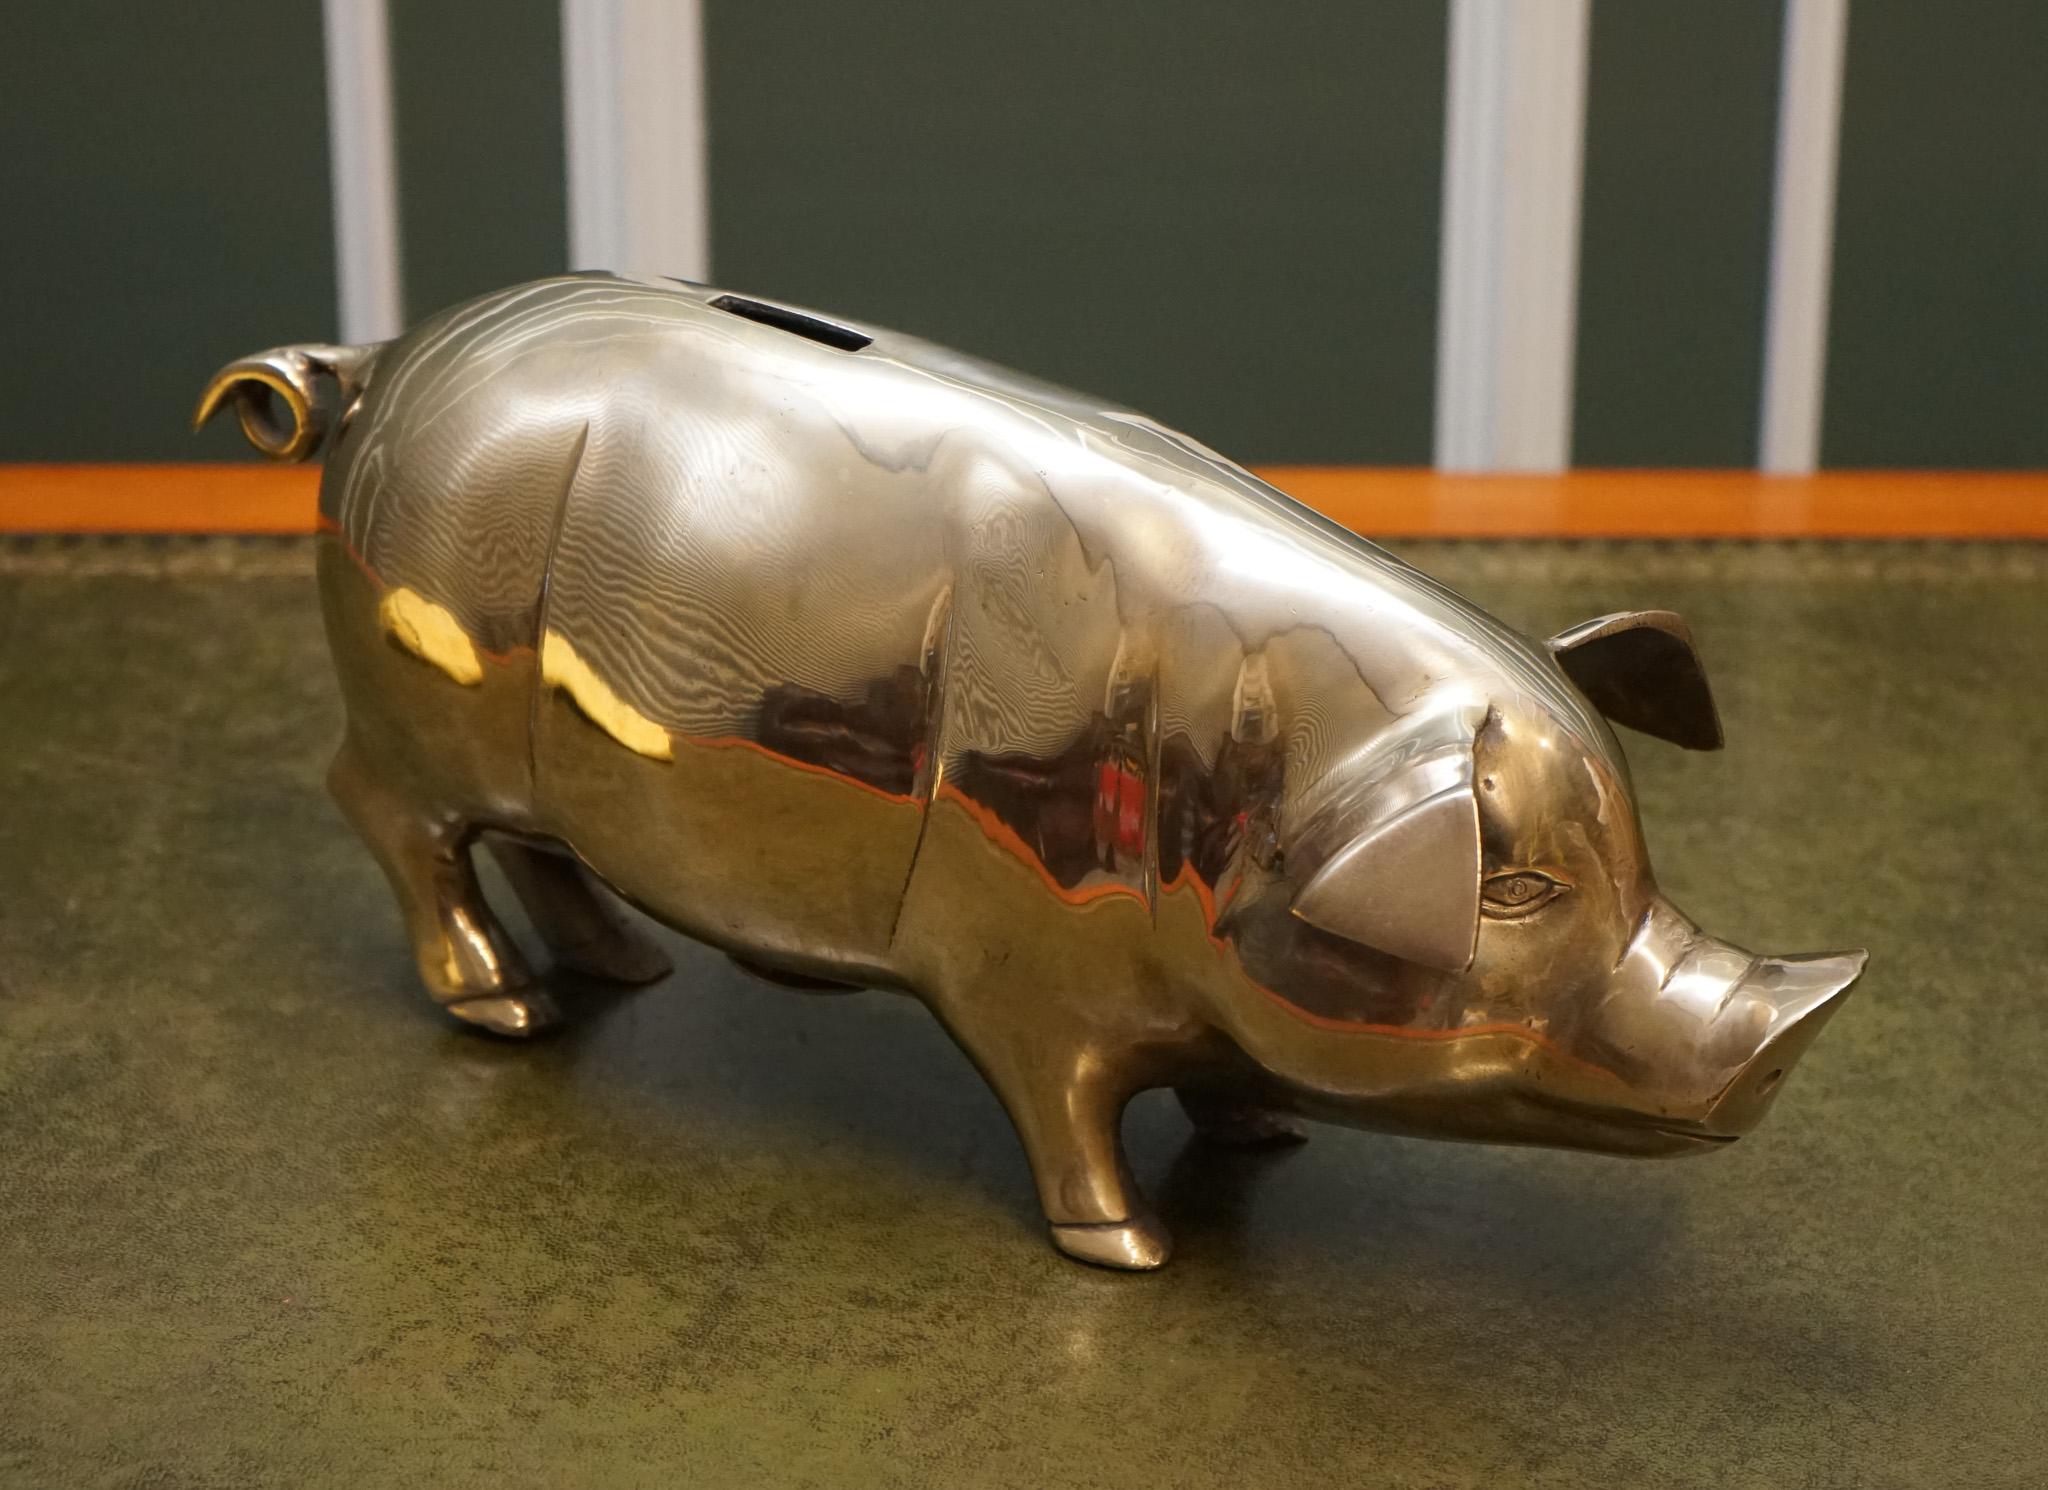 
We are delighted to offer for sale this Lovely 1920s Antique Brass Piggy Bank.

 The piggy bank would resemble an actual pig with all the features that the animal has, such as ears, snout, curly tail, and four hoofs. 
The brass used is of high